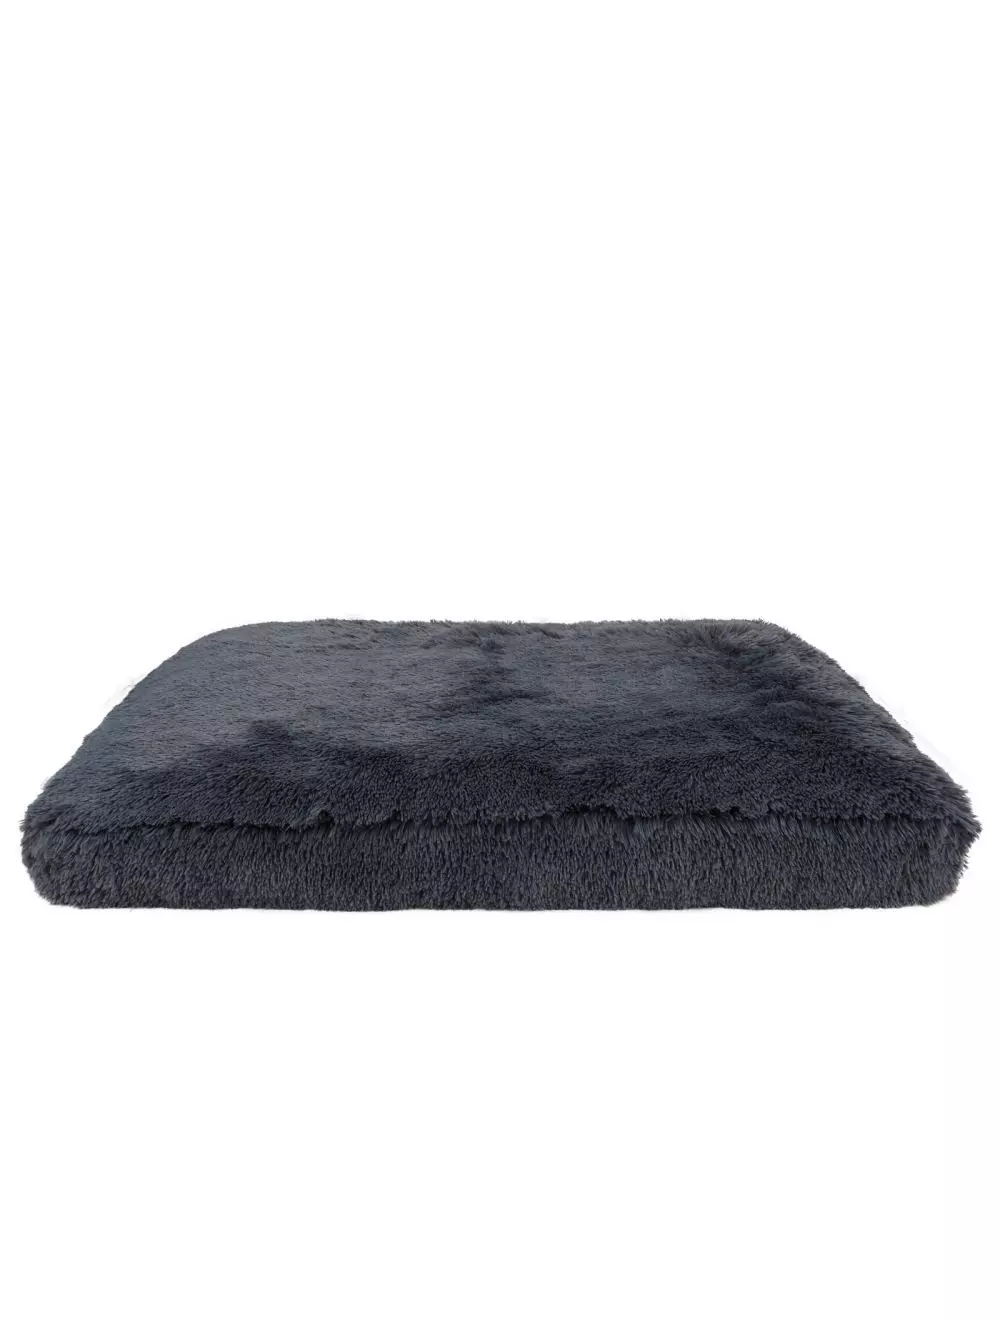 Fluffy Dogpillow S, Anthracite 697271866292